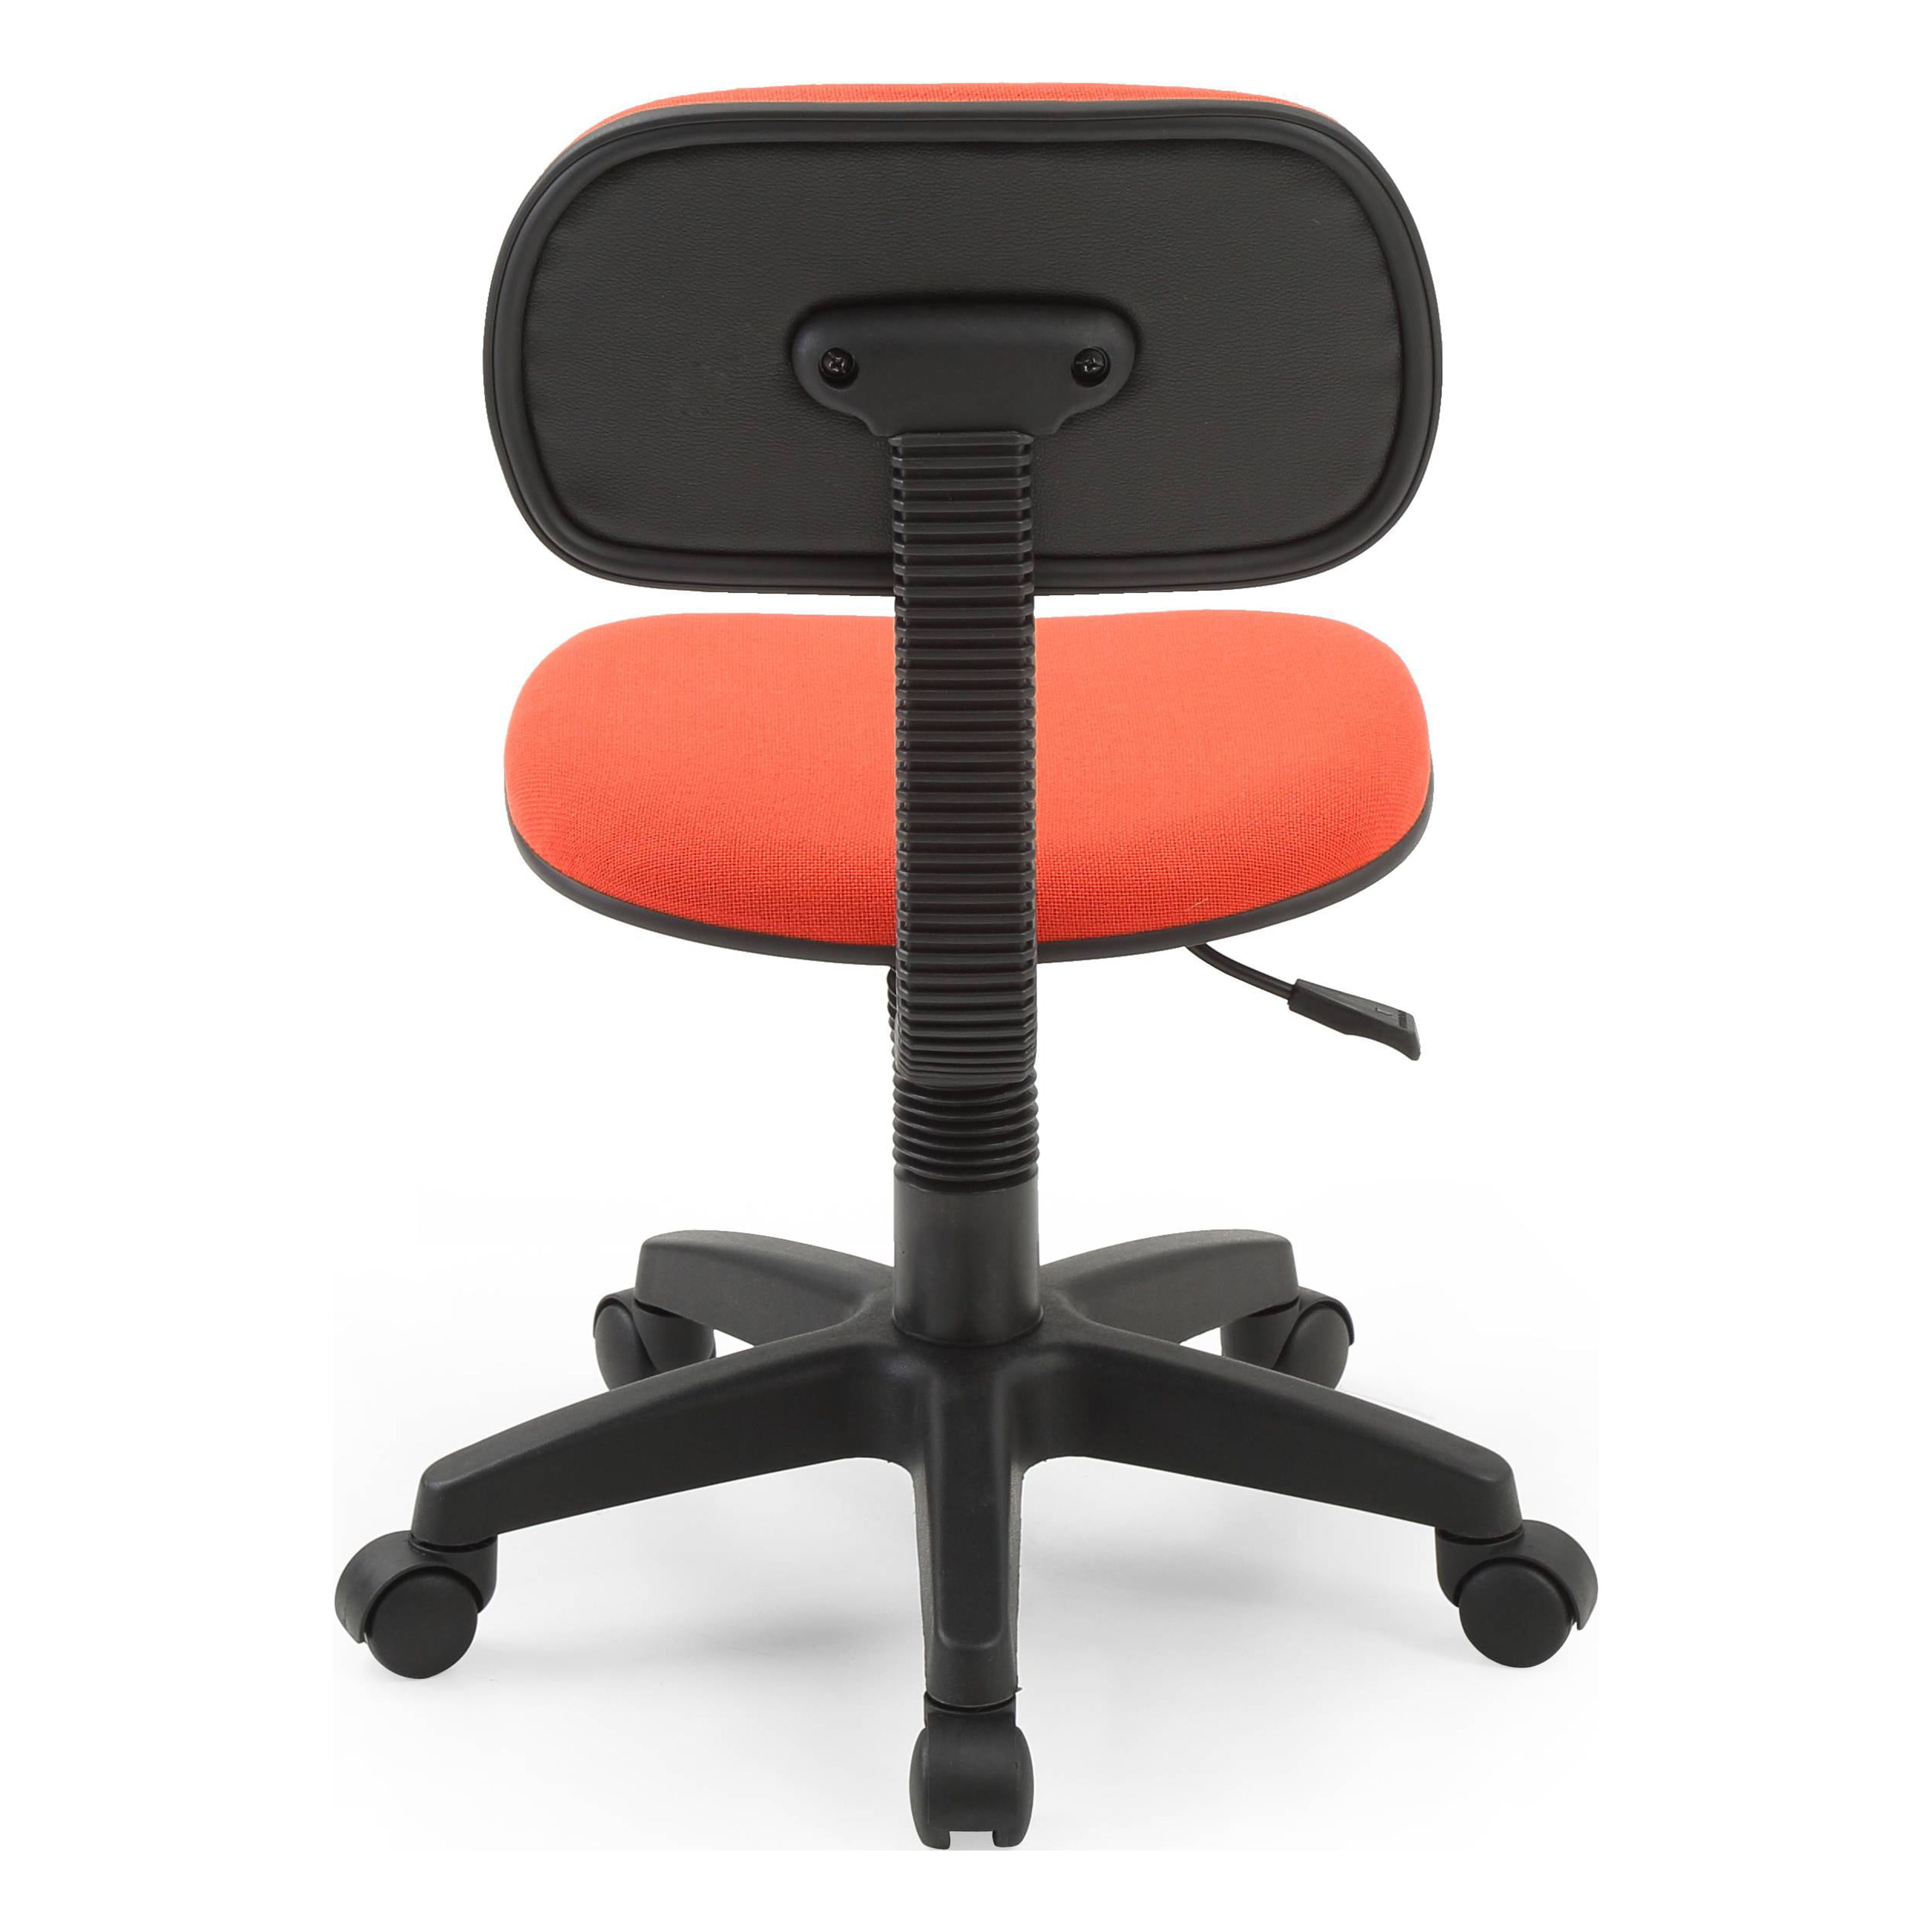 12 Best Office Chairs for People with ADHD by hansdersch - Issuu